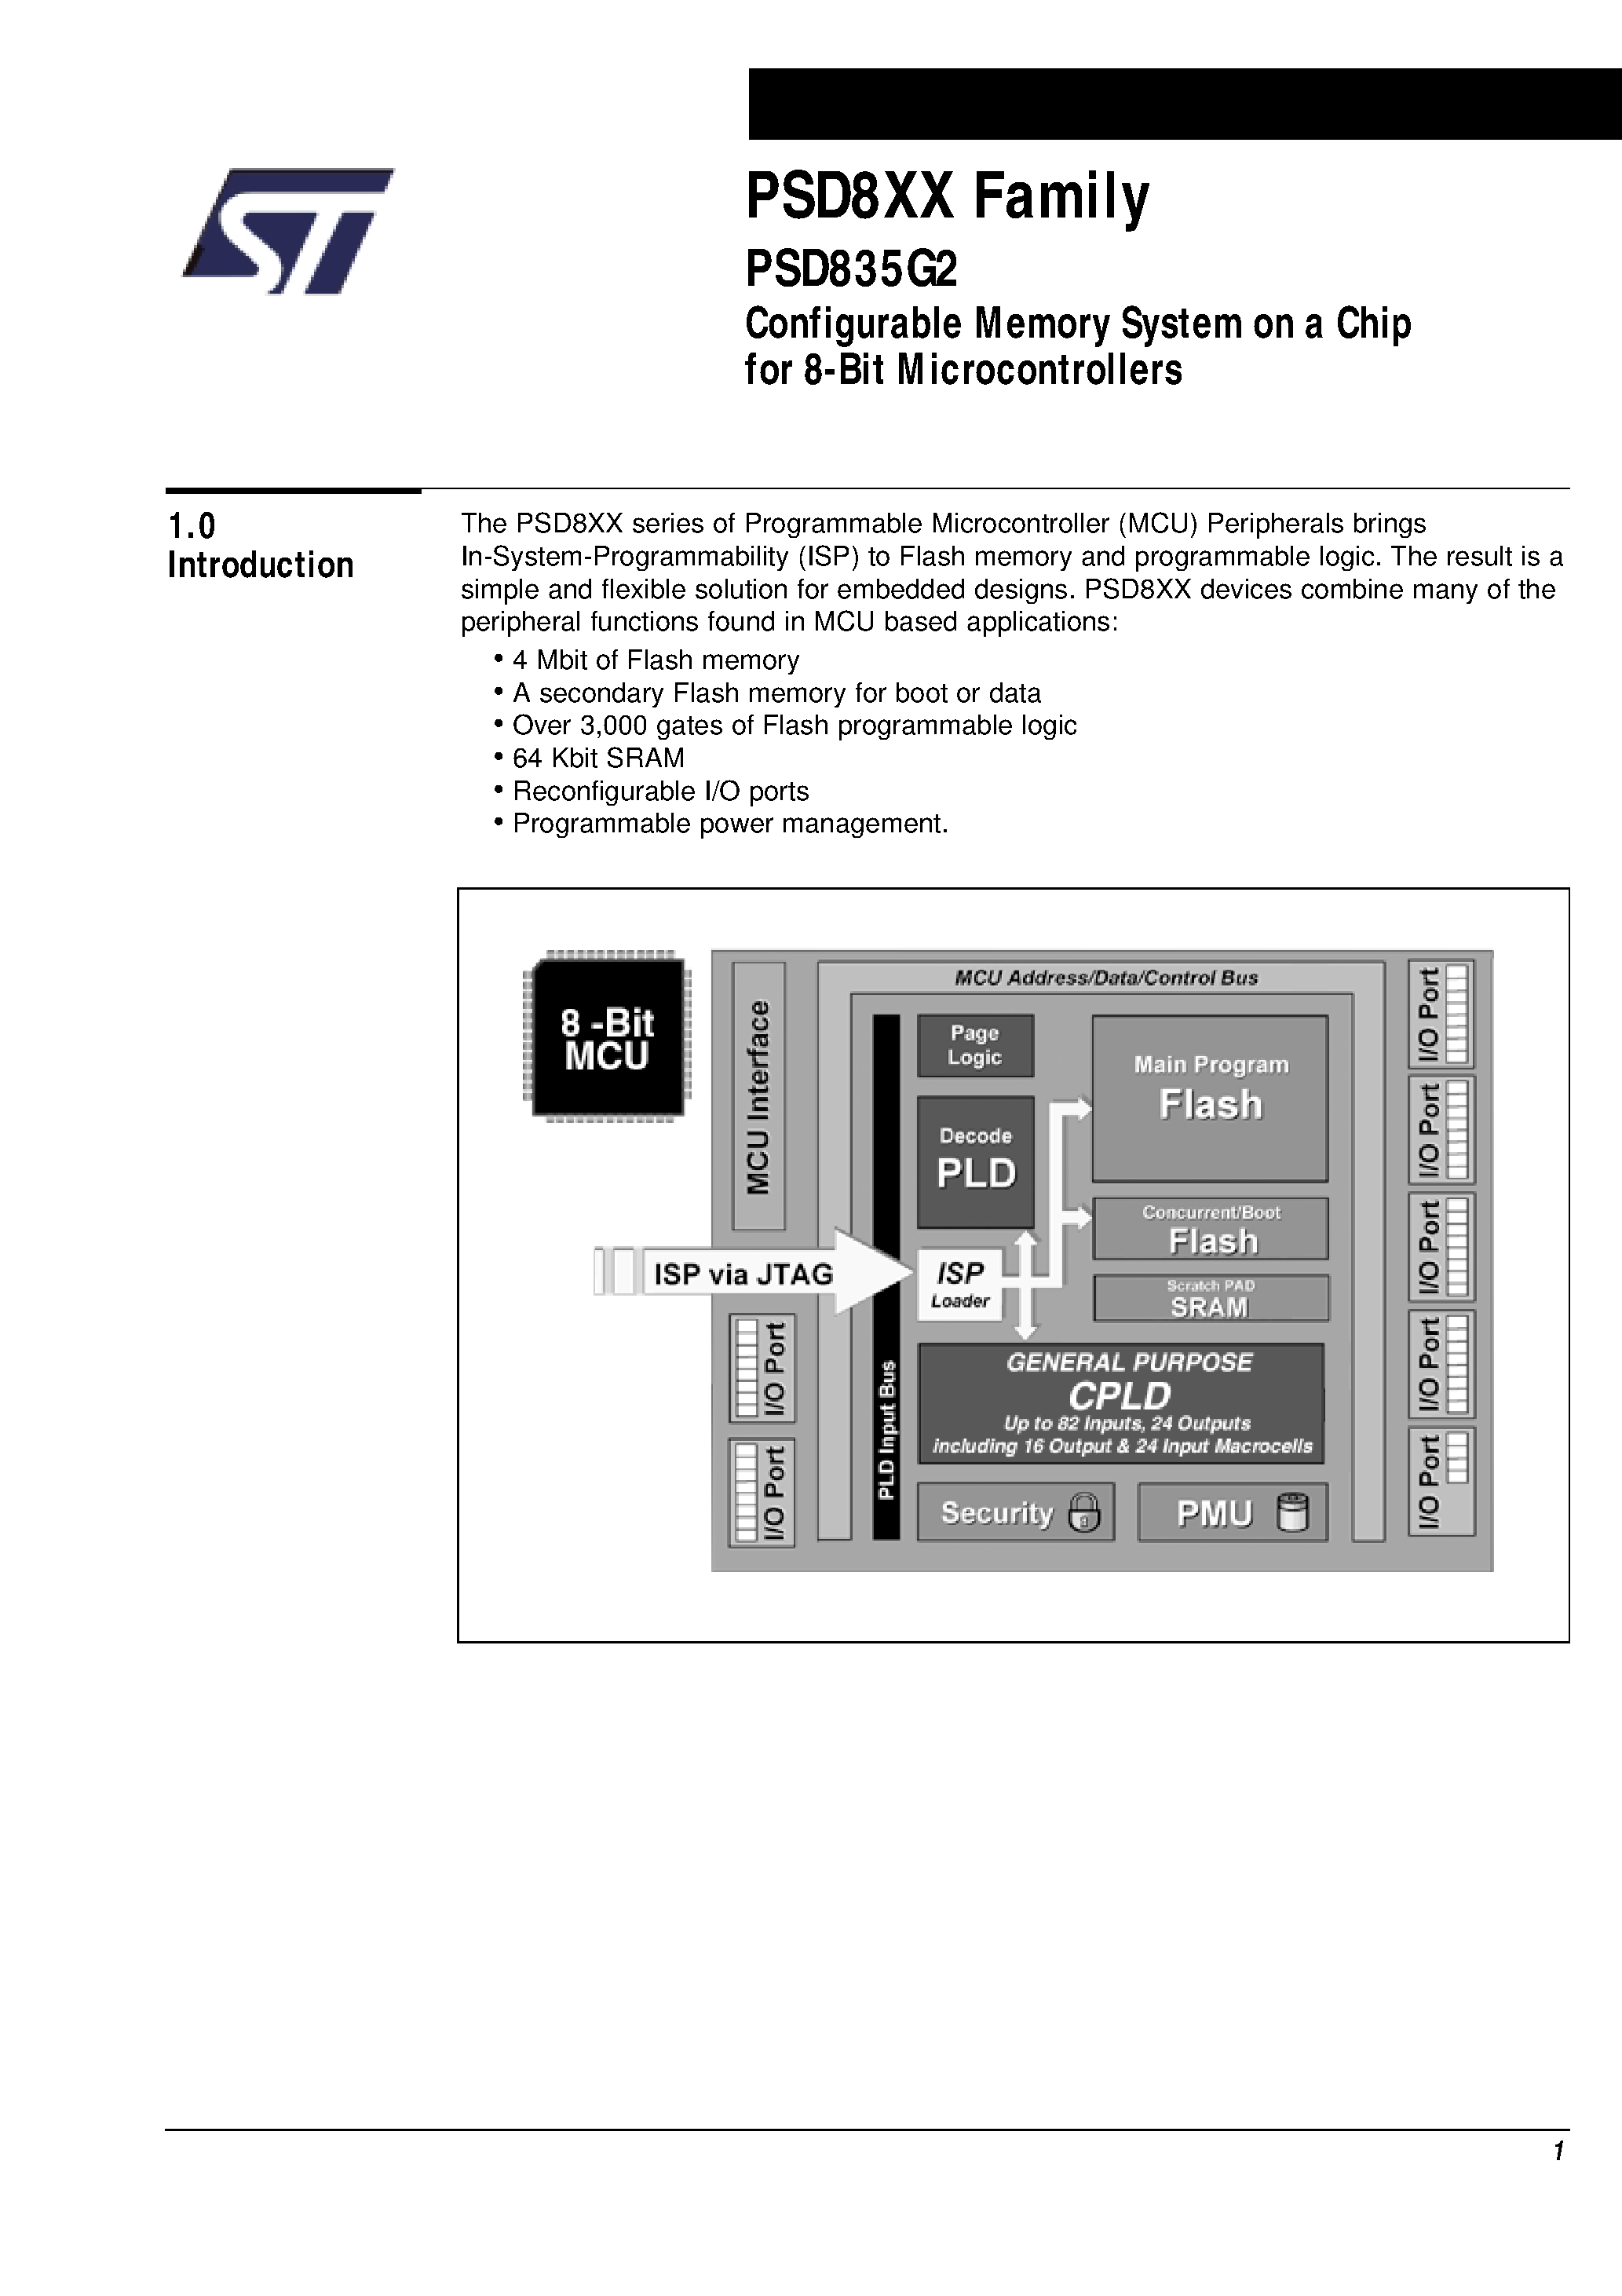 Datasheet PSD835F1-A-70JI - Configurable Memory System on a Chip for 8-Bit Microcontrollers page 2